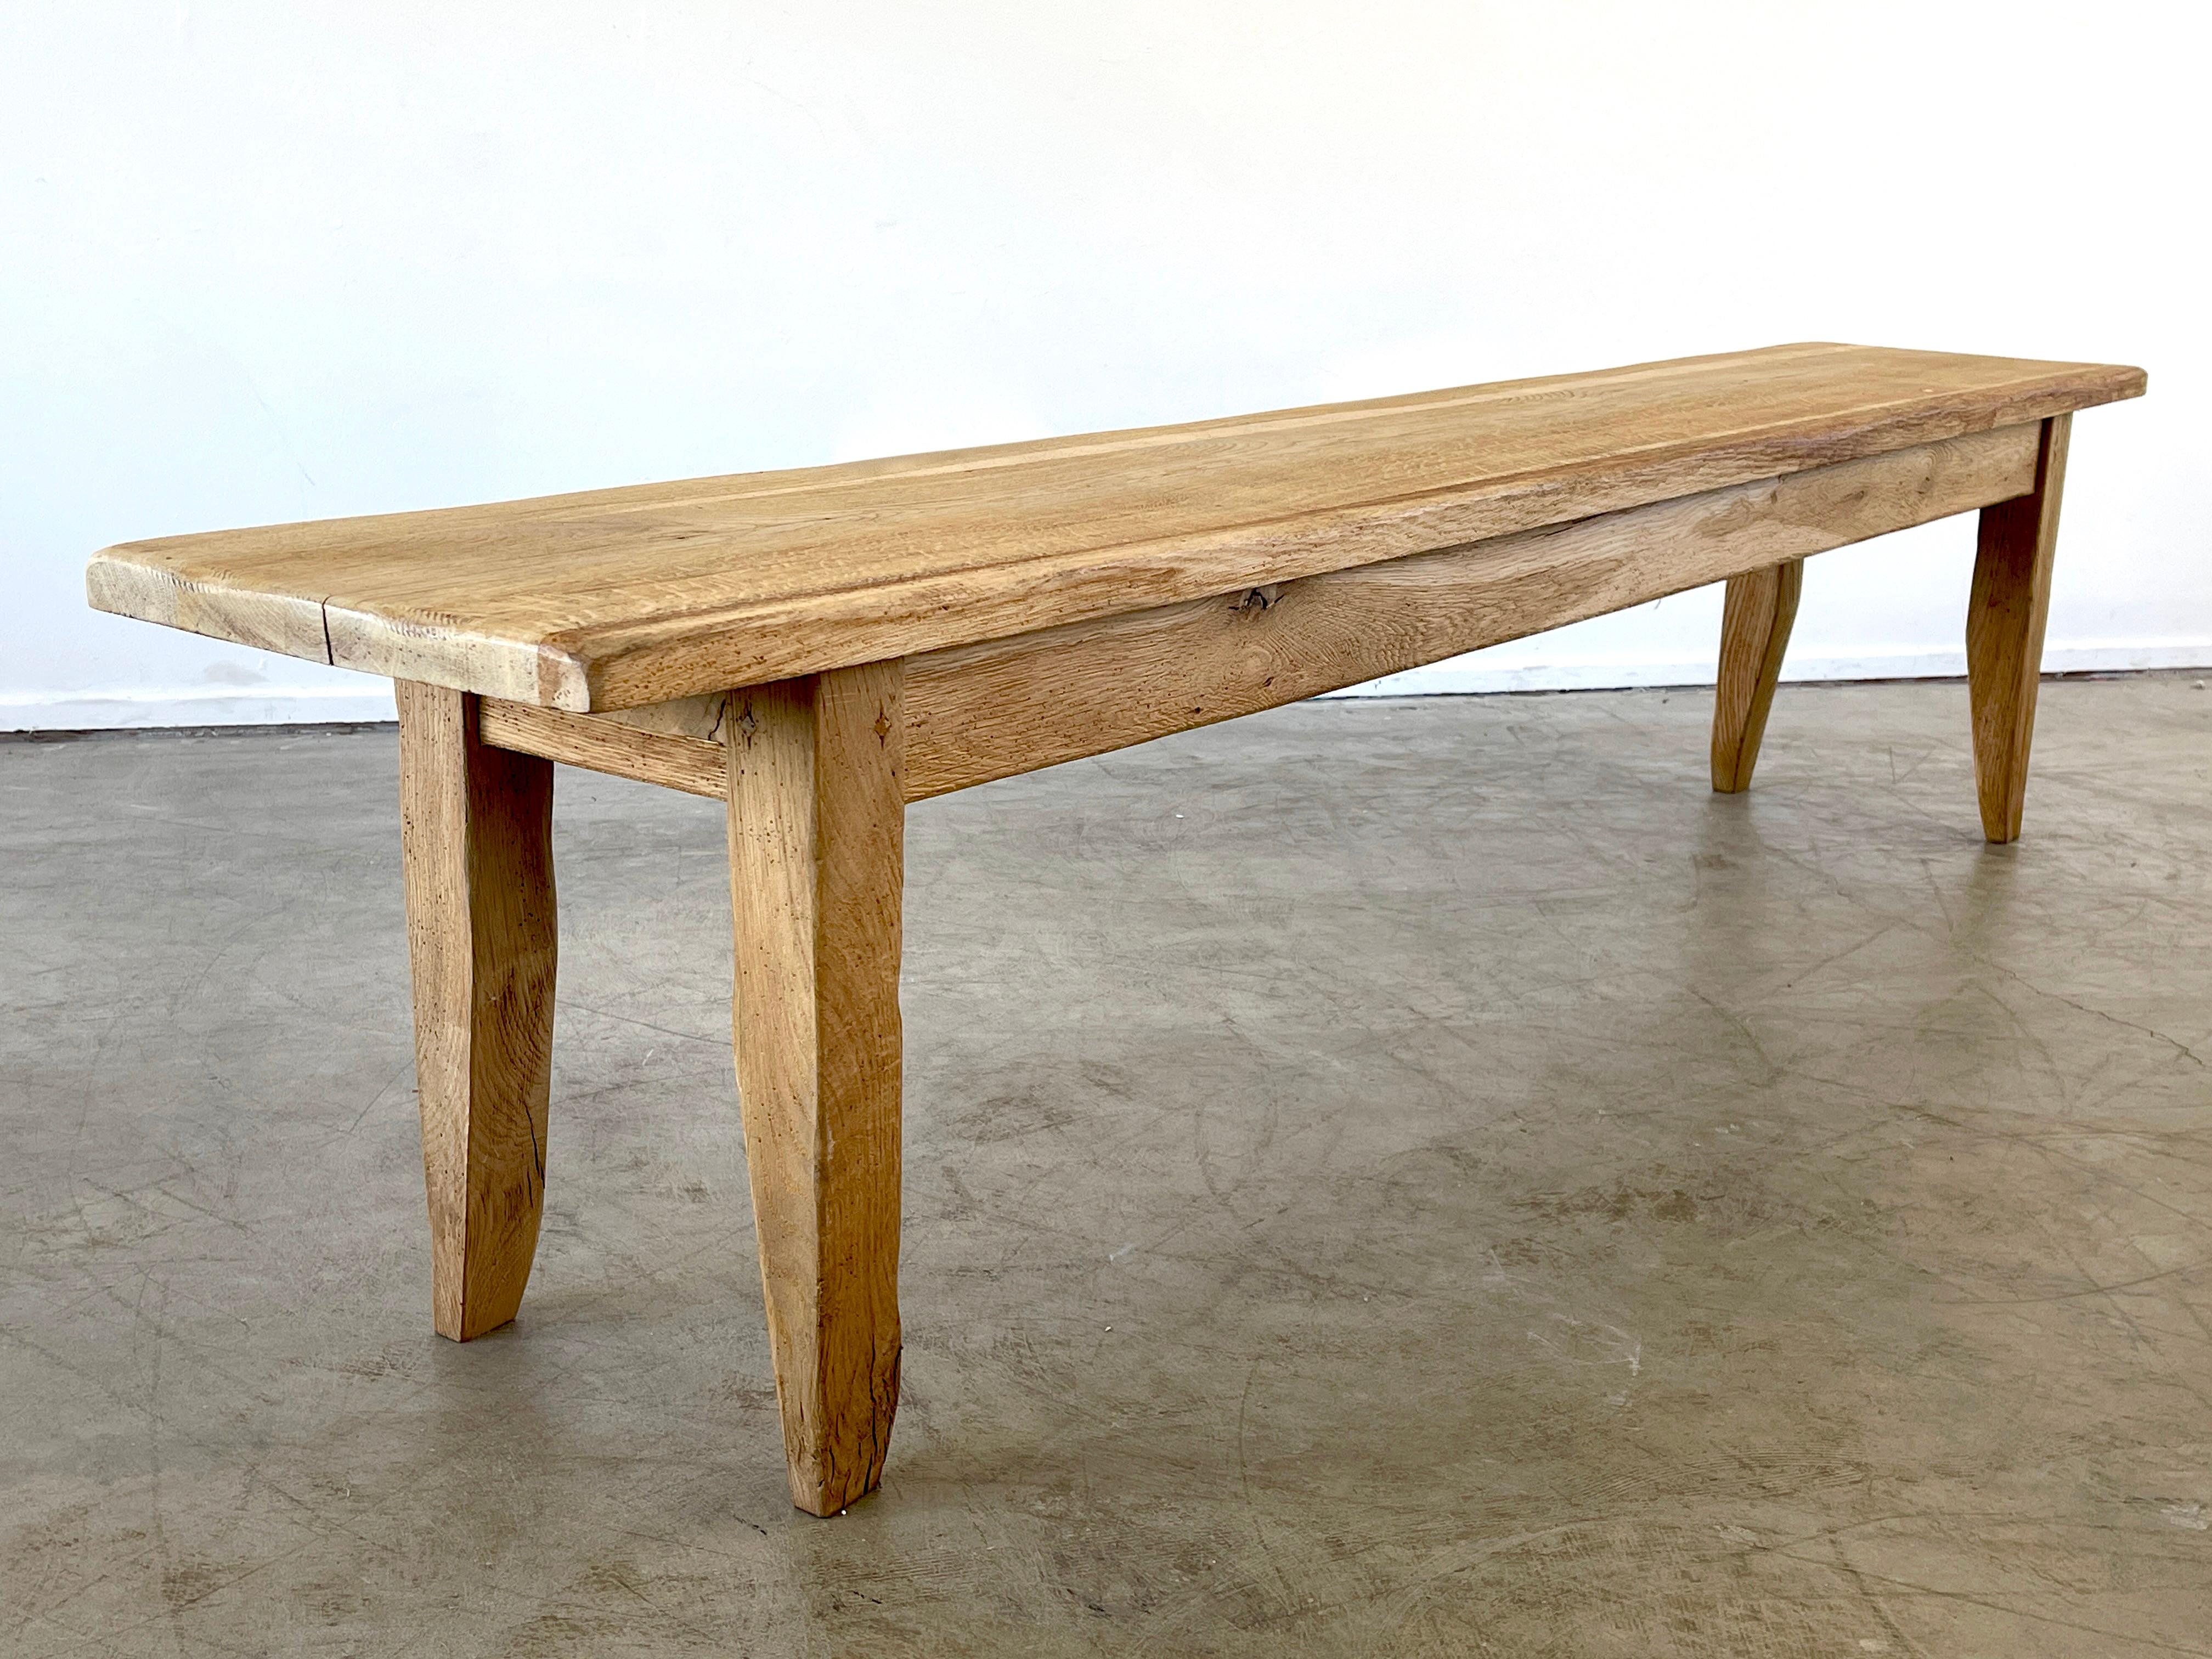 Fantastic oak bench with simple lines and angular legs. 
France, circa 1950s
Wonderful patina and wood grain